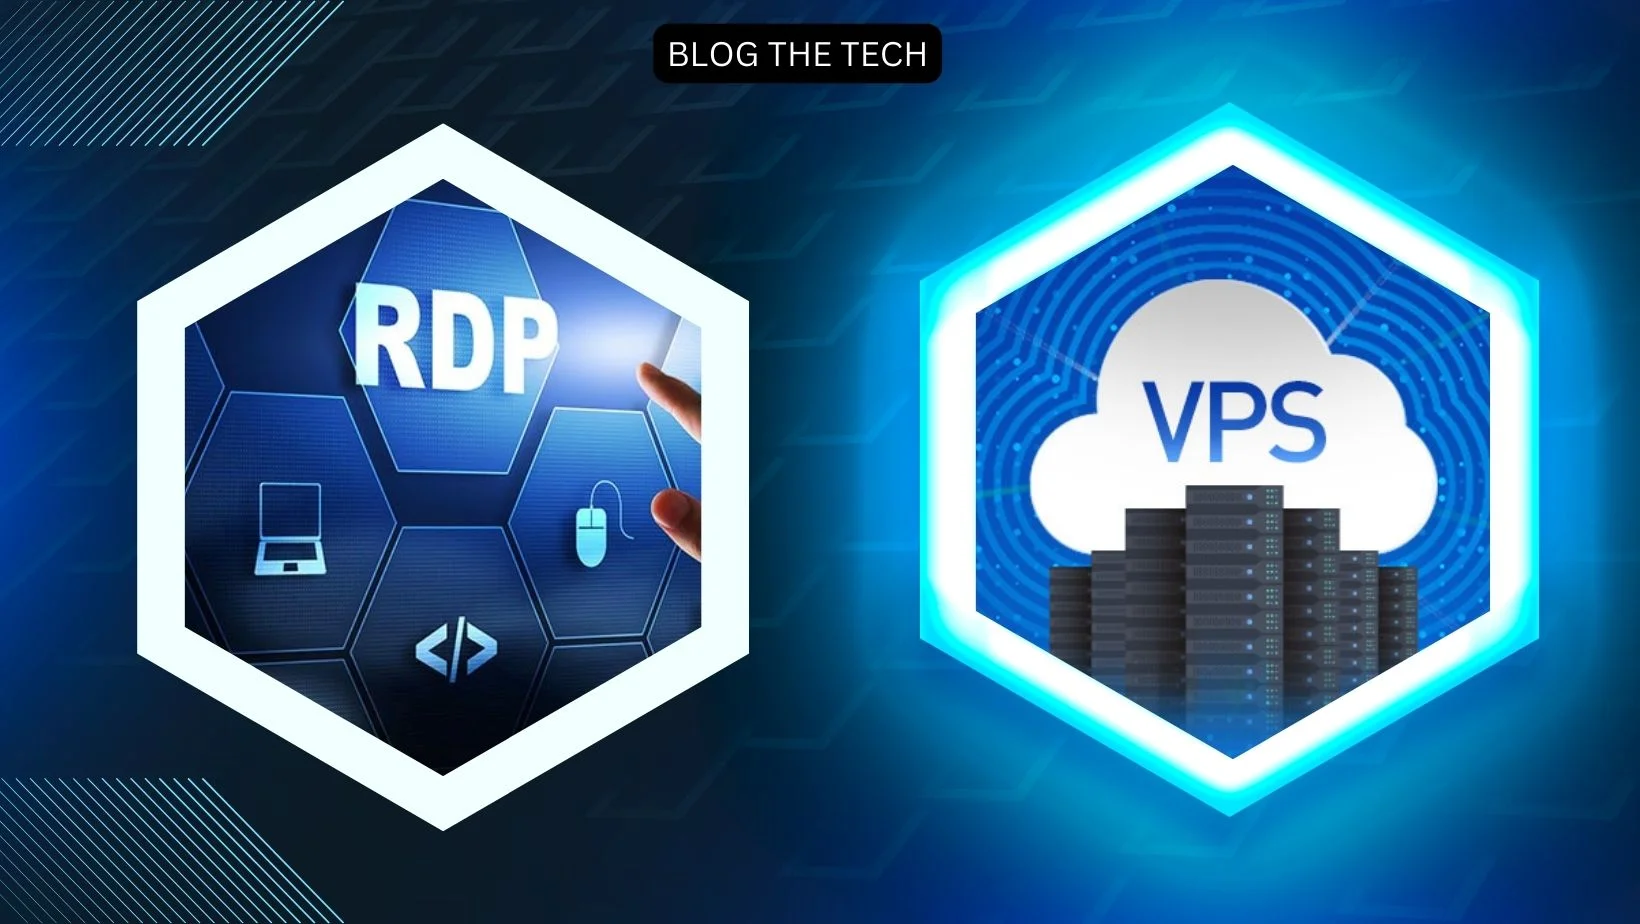 What is the difference between RDP and VPS?